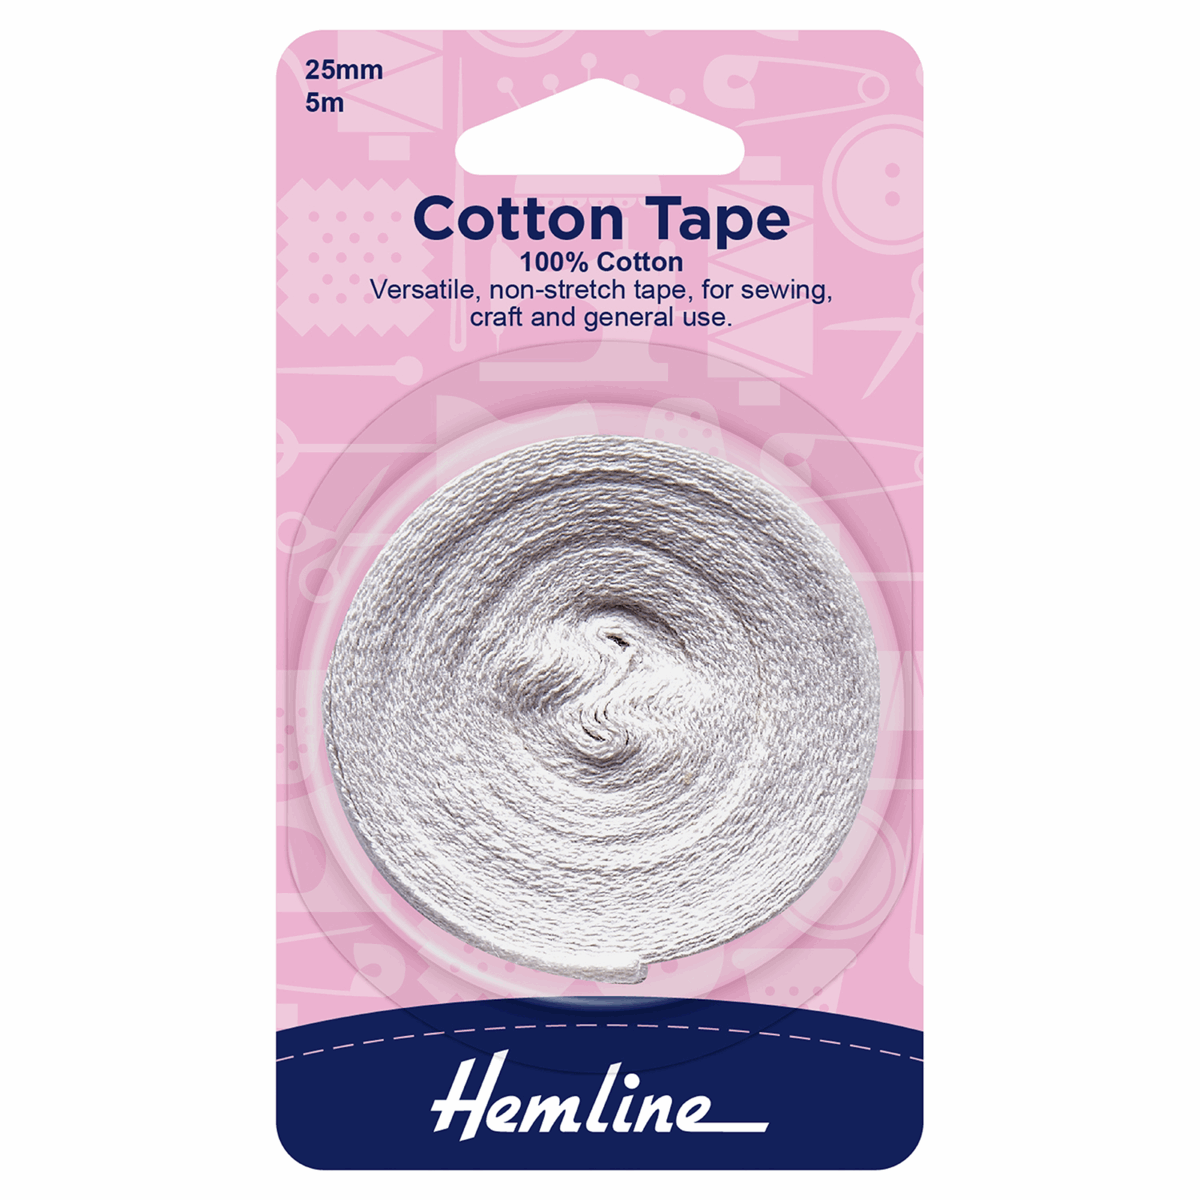 Cotton Tape Machine Washable - 5 Mtrs Packet